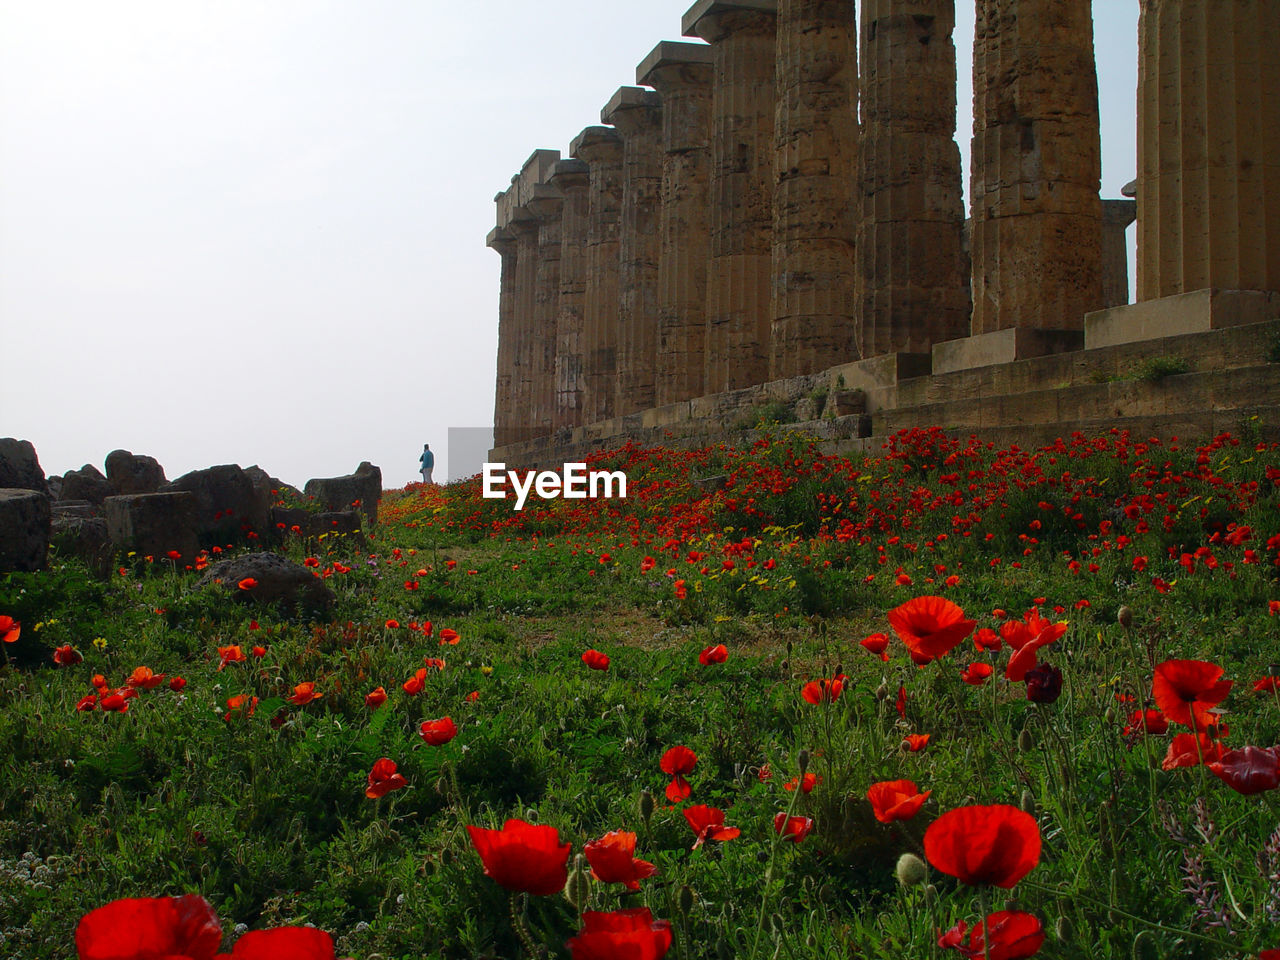 flower, flowering plant, red, plant, architecture, building exterior, history, the past, built structure, nature, freshness, fragility, growth, sky, poppy, beauty in nature, vulnerability, day, no people, land, outdoors, flower head, ancient civilization, flowerbed